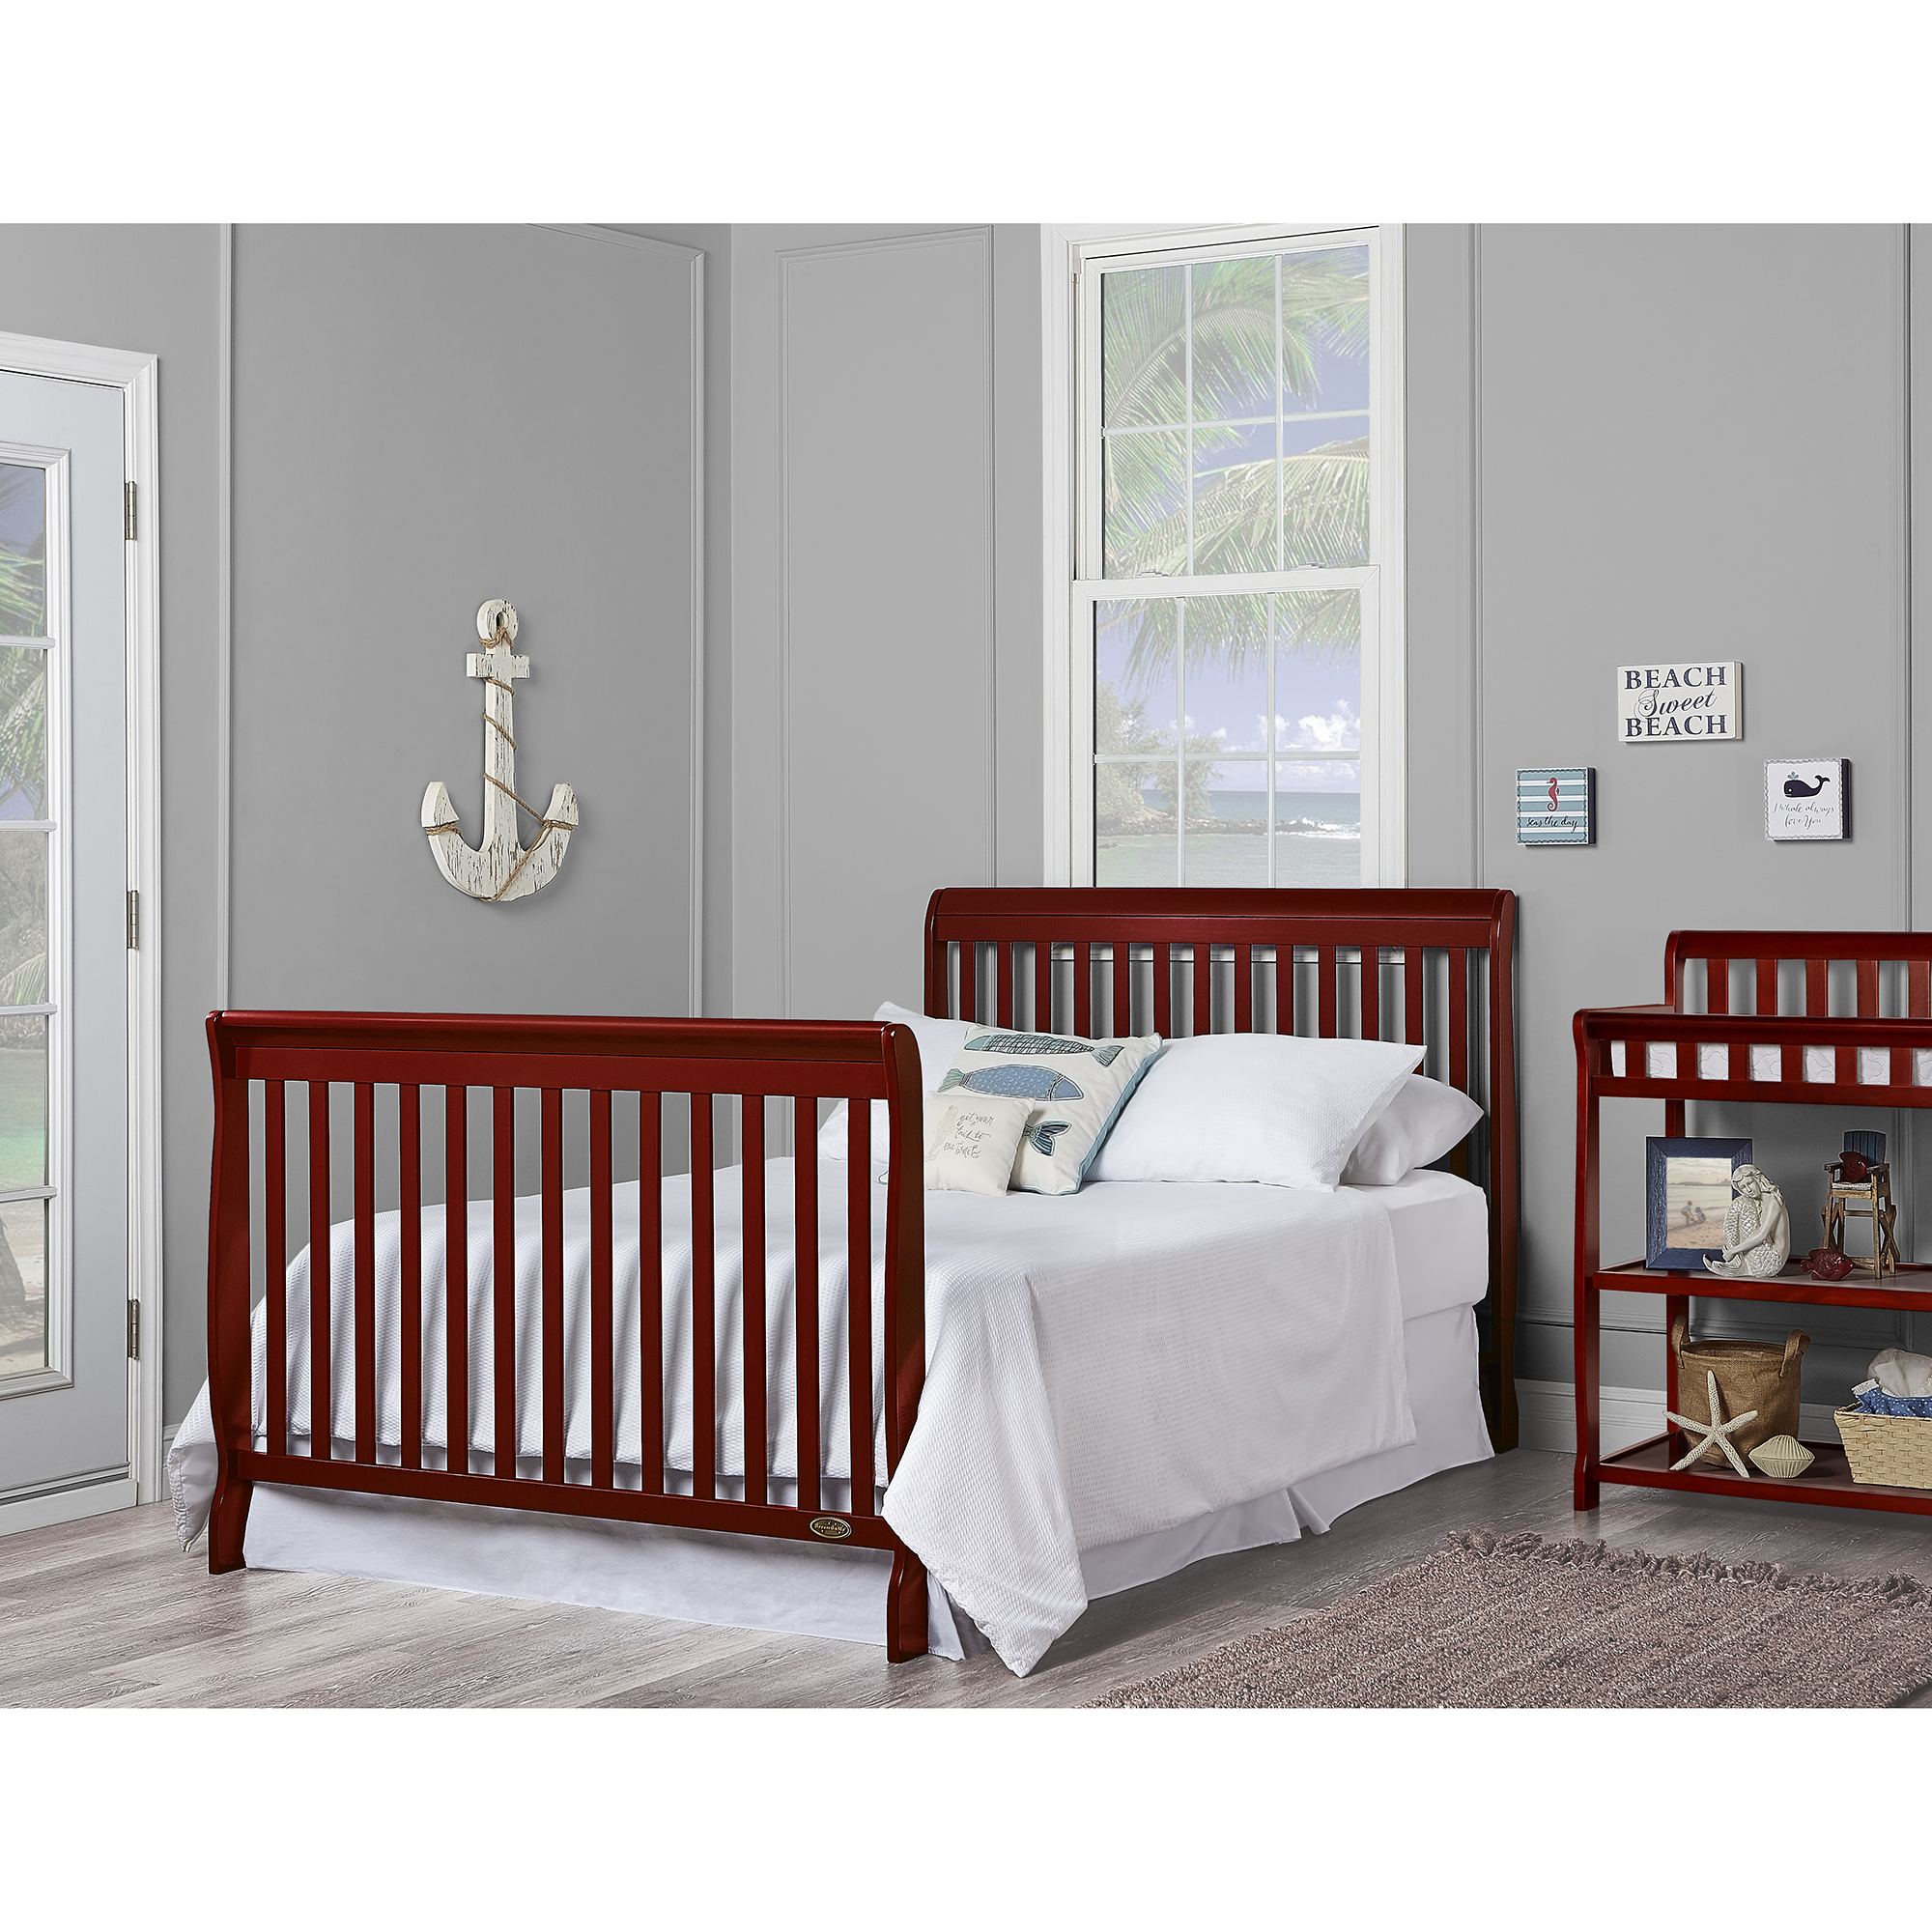 Dream On Me Ashton 5-in-1 Convertible Crib, Cherry, Greenguard Gold and JPMA Certified - image 4 of 15